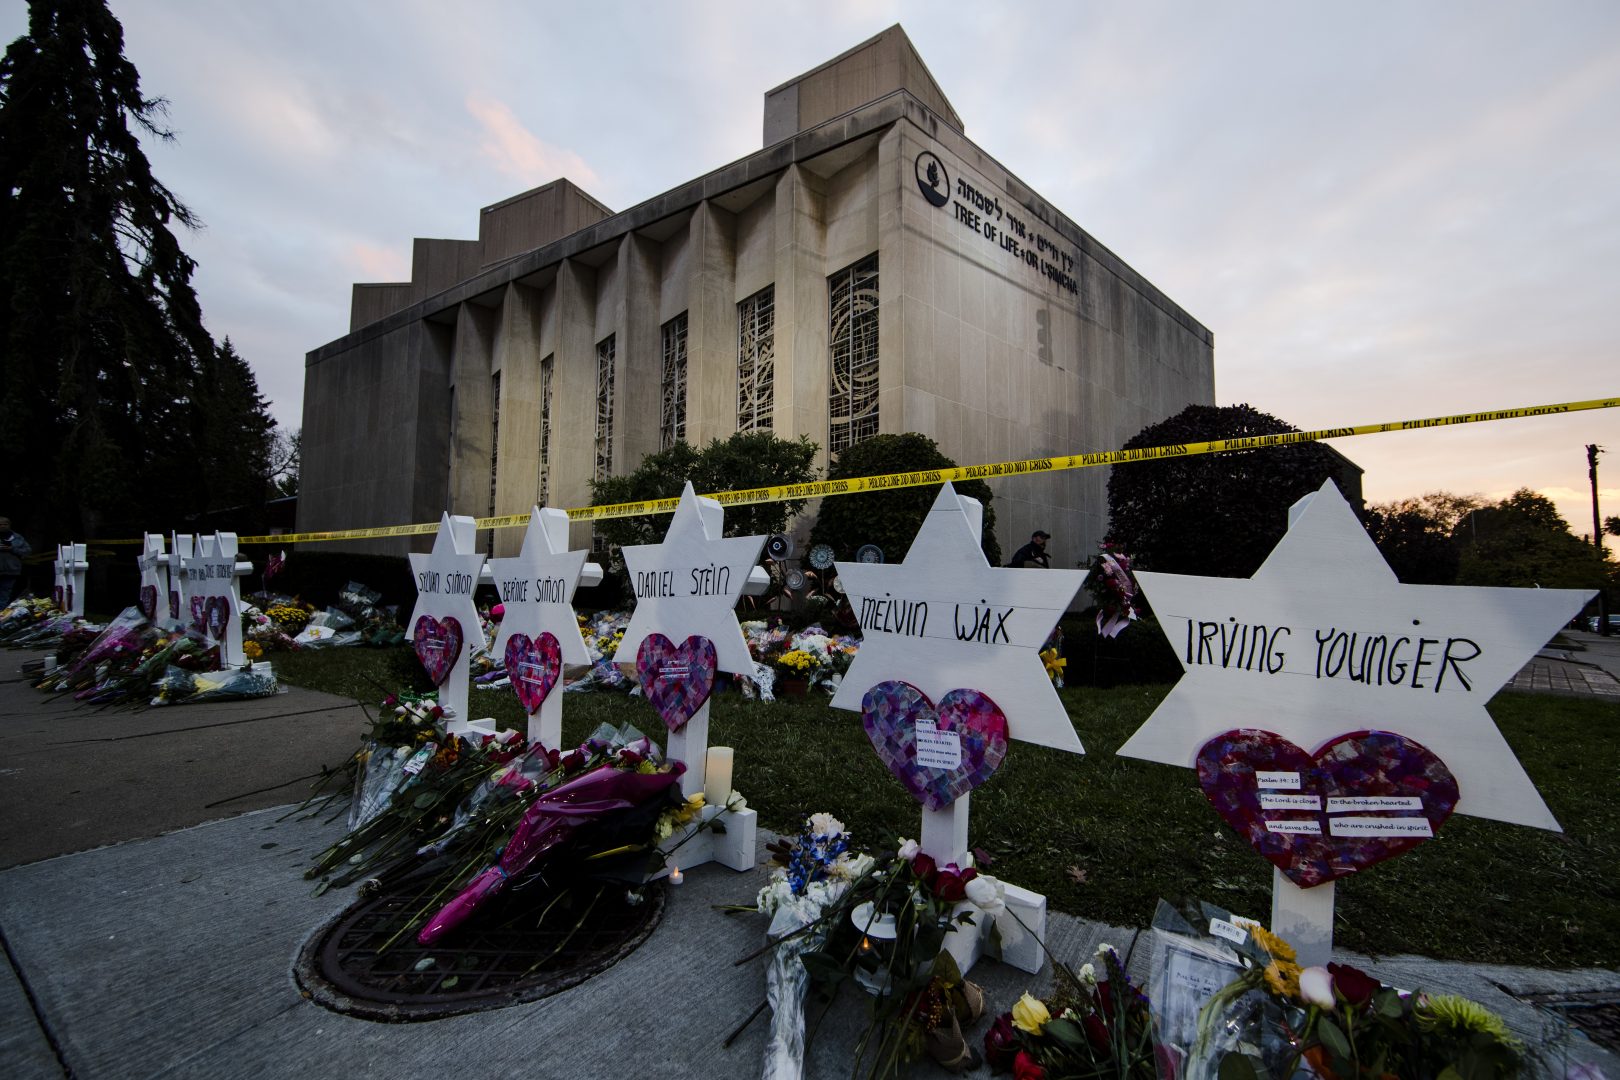 FILE - A makeshift memorial stands outside the Tree of Life Synagogue in Pittsburgh, Monday, Oct. 29, 2018 in the aftermath of a deadly shooting at the synagogue. (AP Photo/Matt Rourke, File)